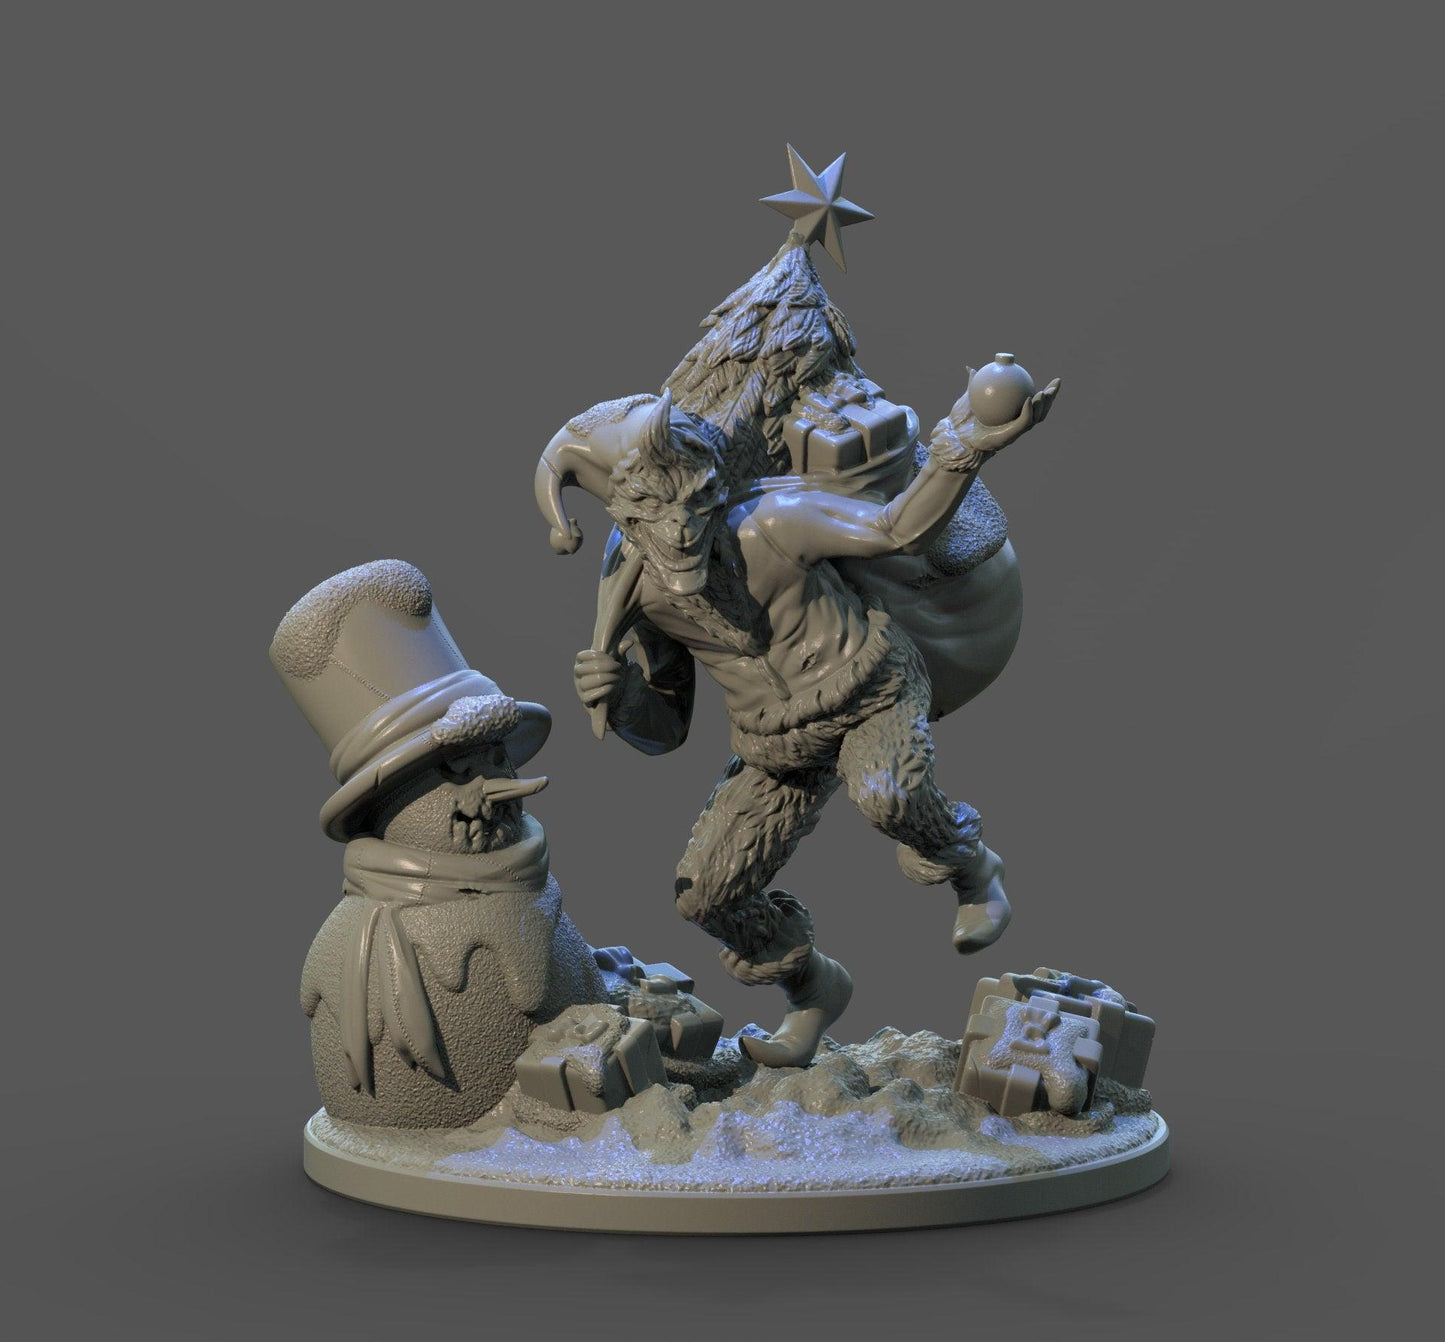 The Grinch Christmas Miniature | Mischievous Mini for a Holiday Home-brew | 32mm Scale - Plague Miniatures shop for DnD Miniatures